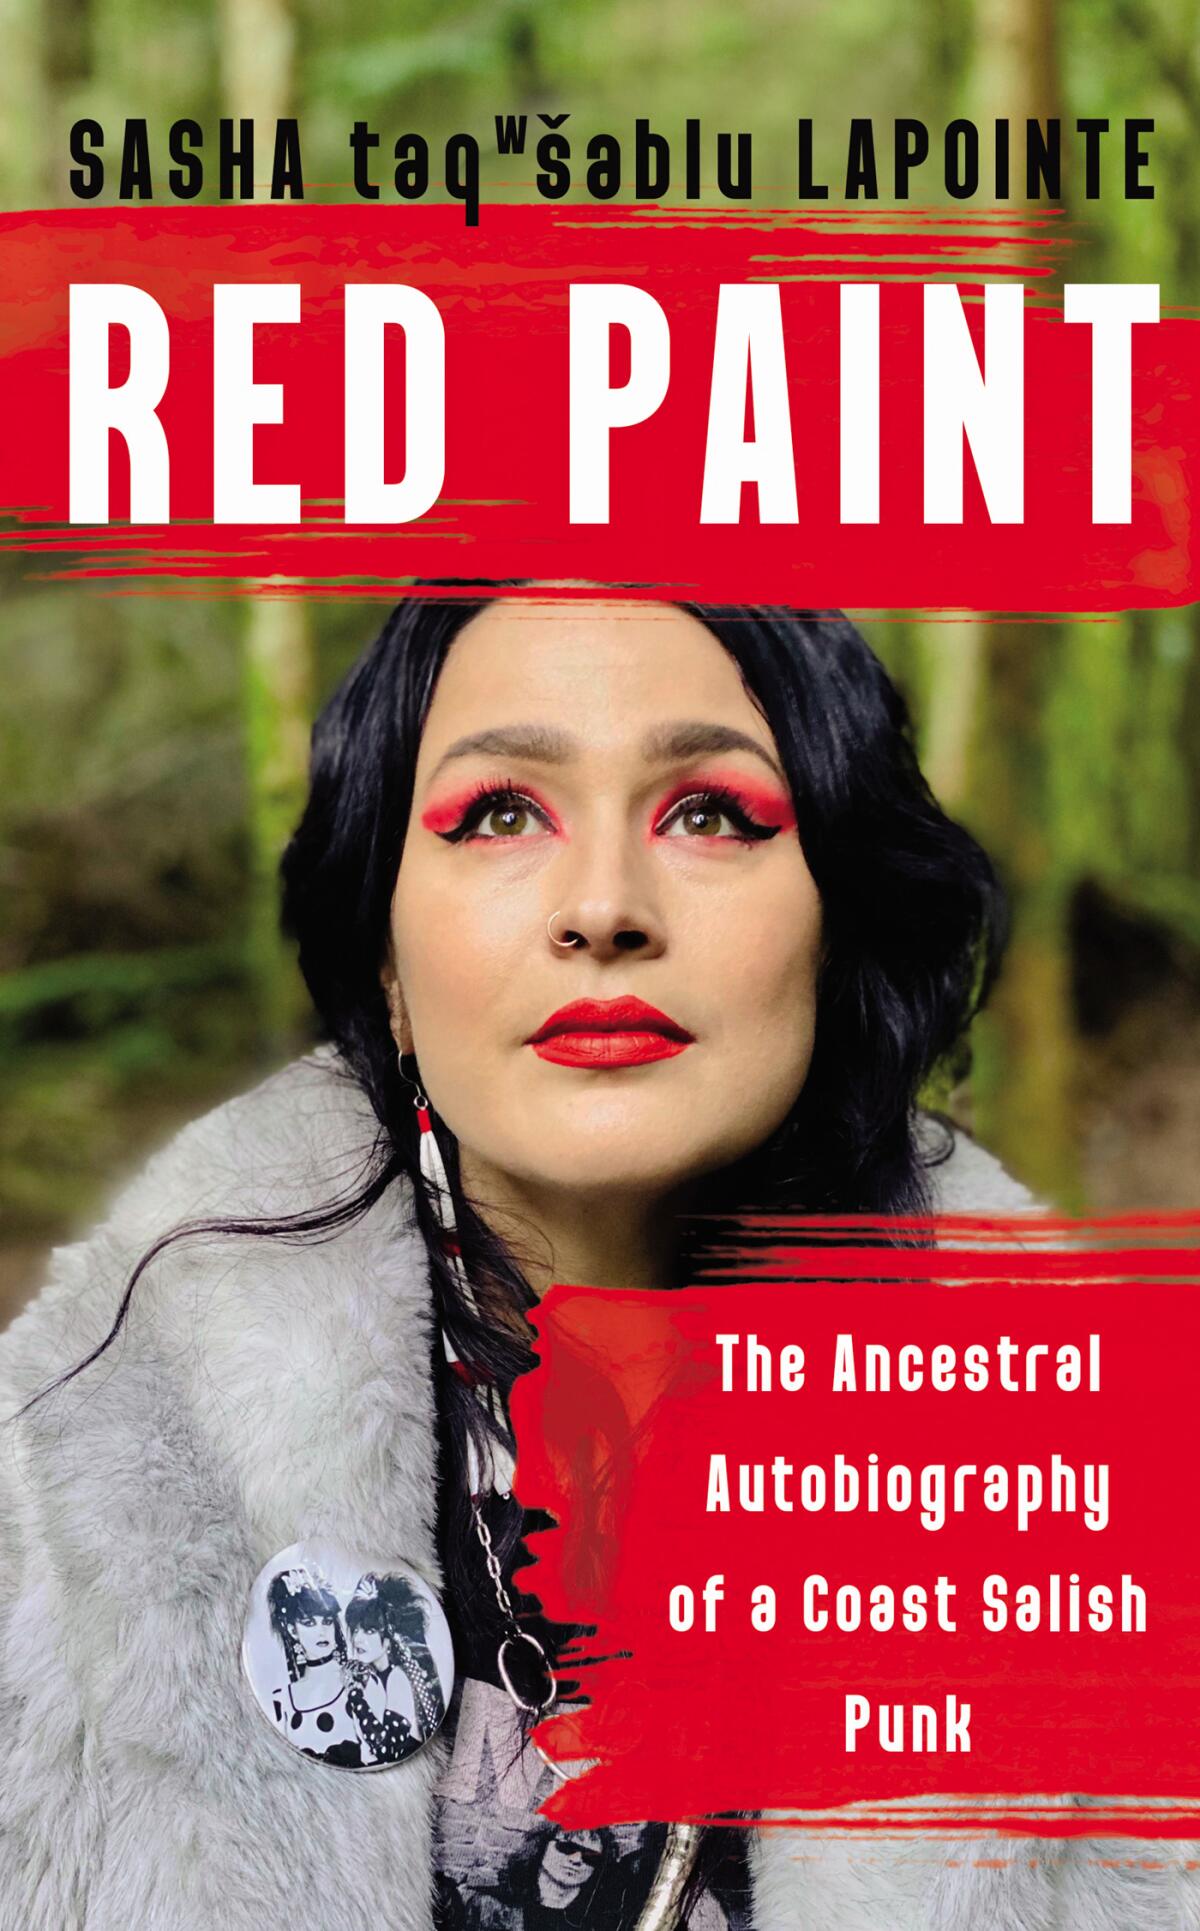 'Red Paint' by Sasha LaPointe